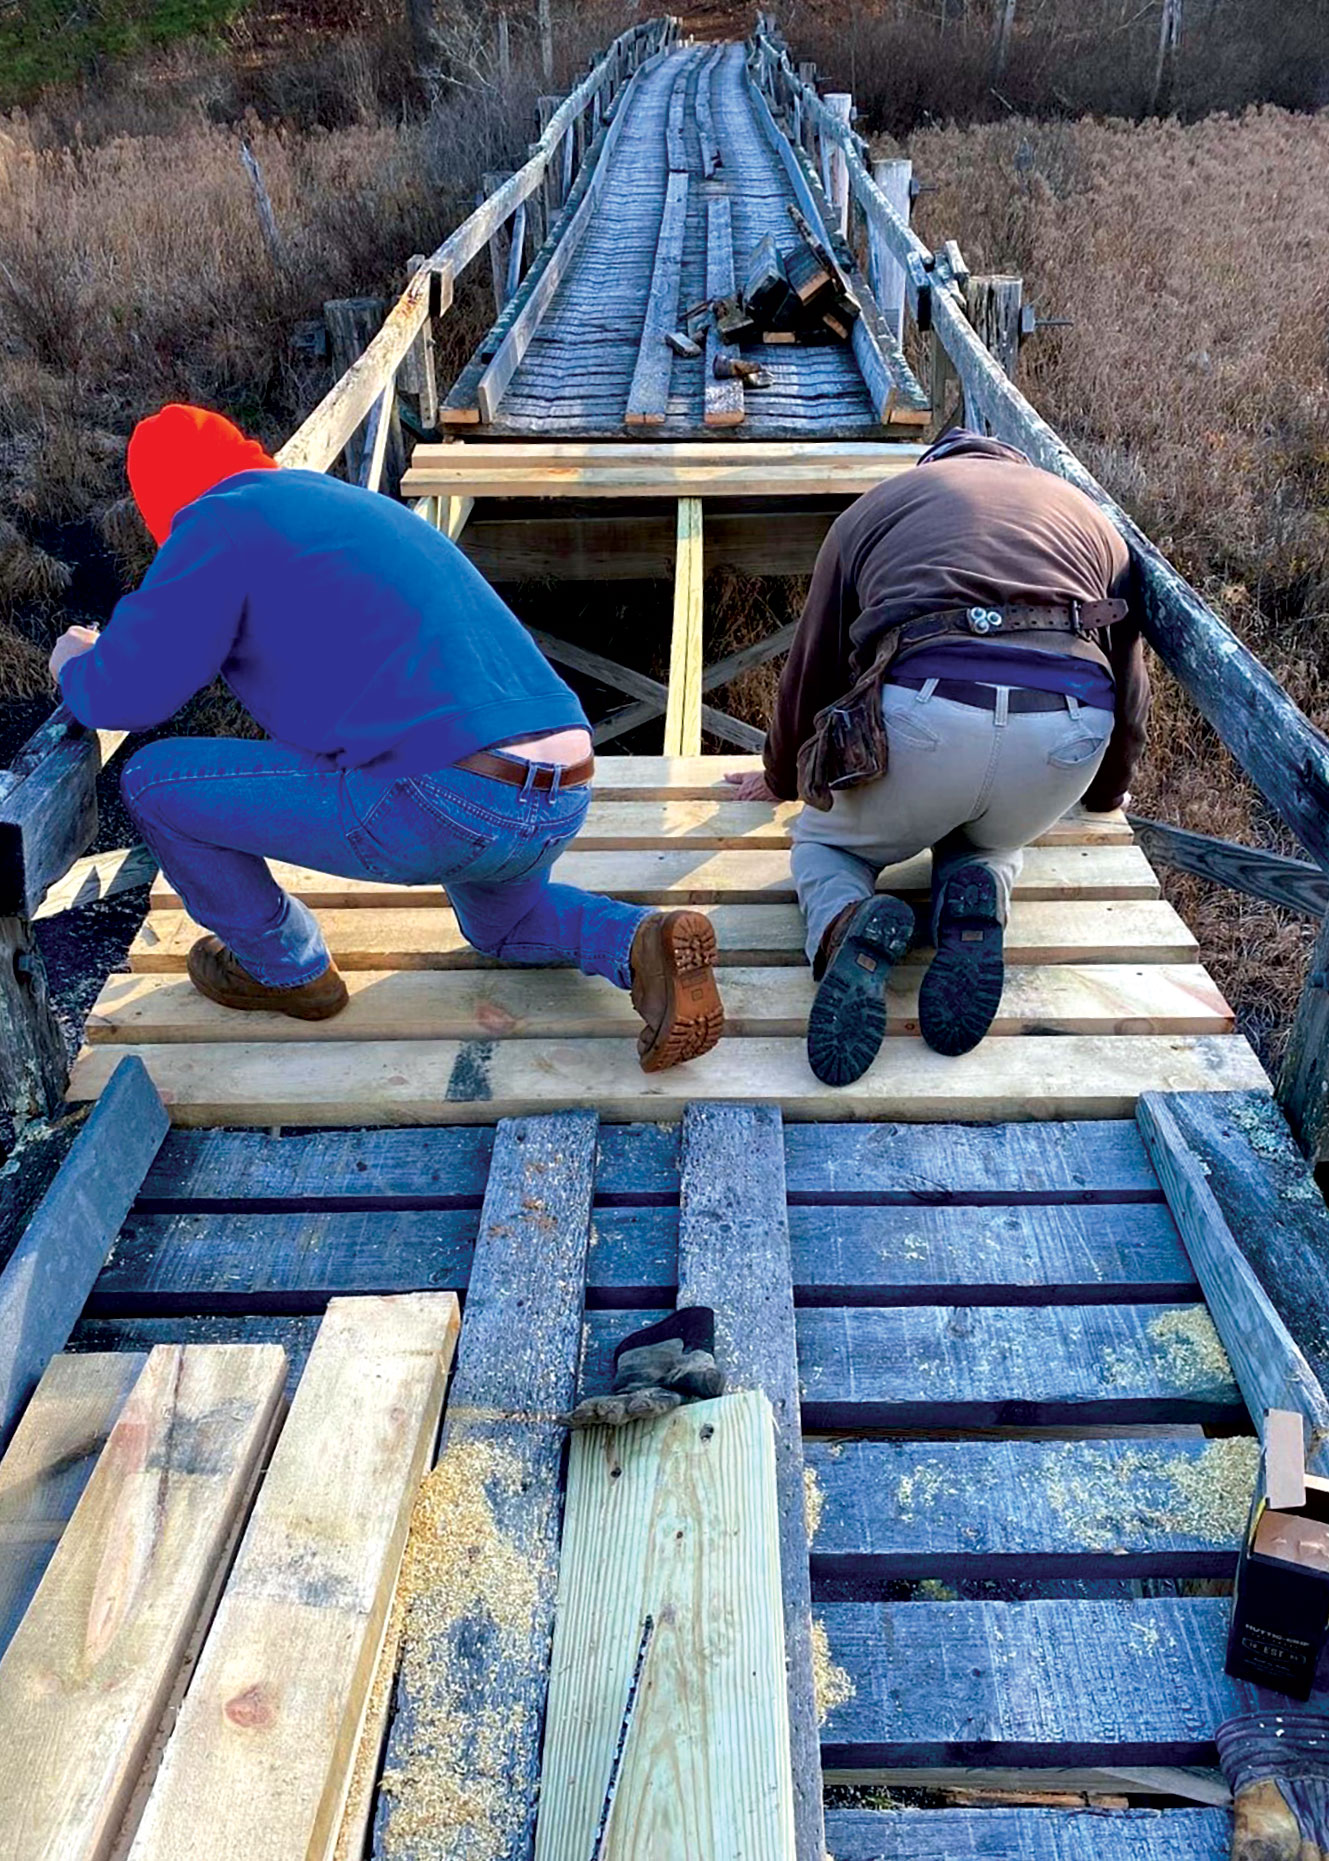 Two men faced away from camera repairing a section of bridge